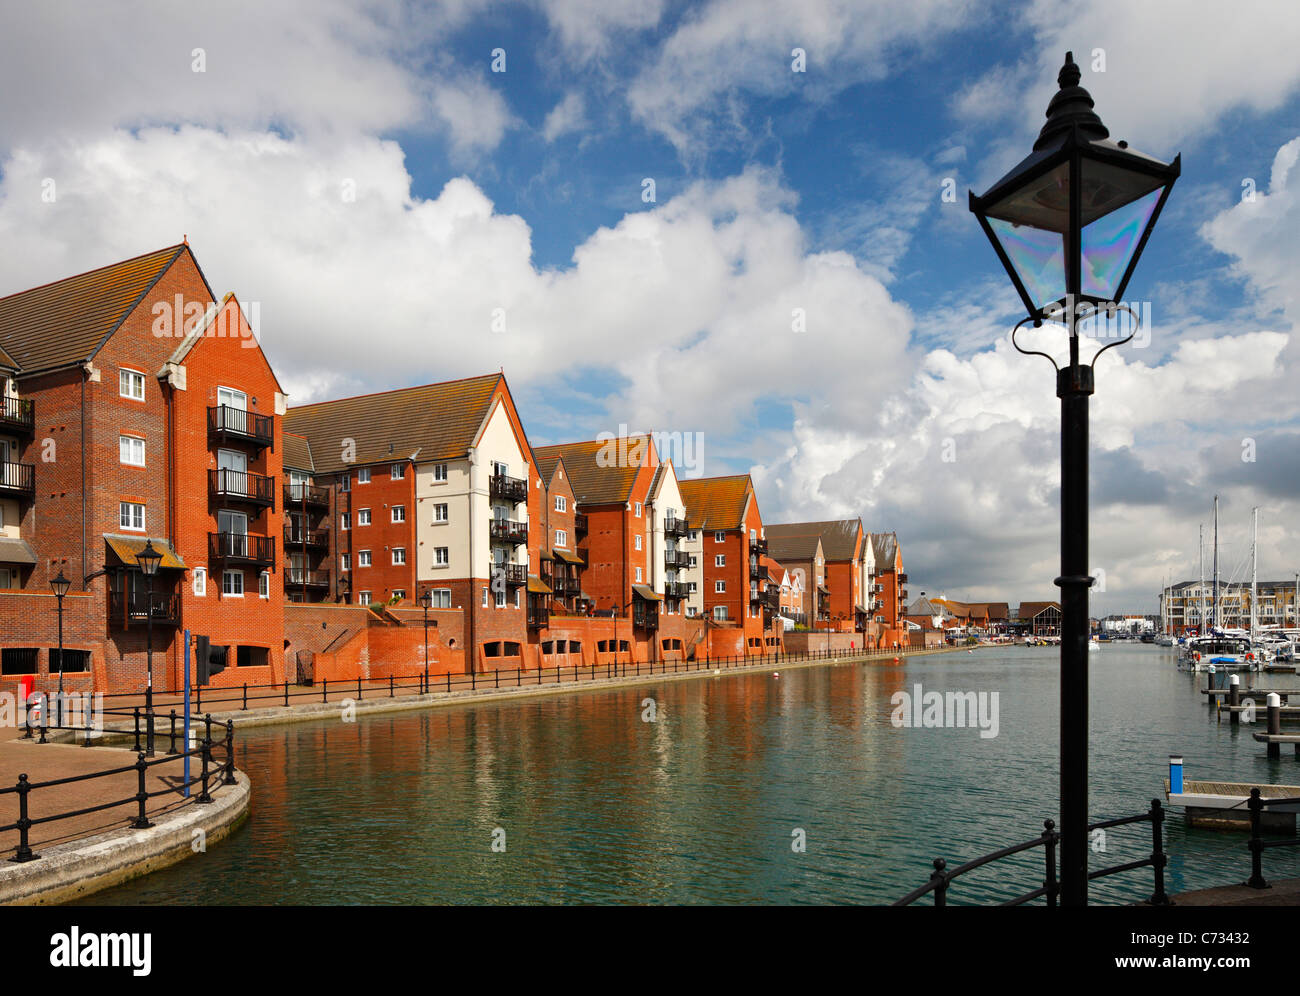 Sovereign Harbour, Eastbourne. Stock Photo